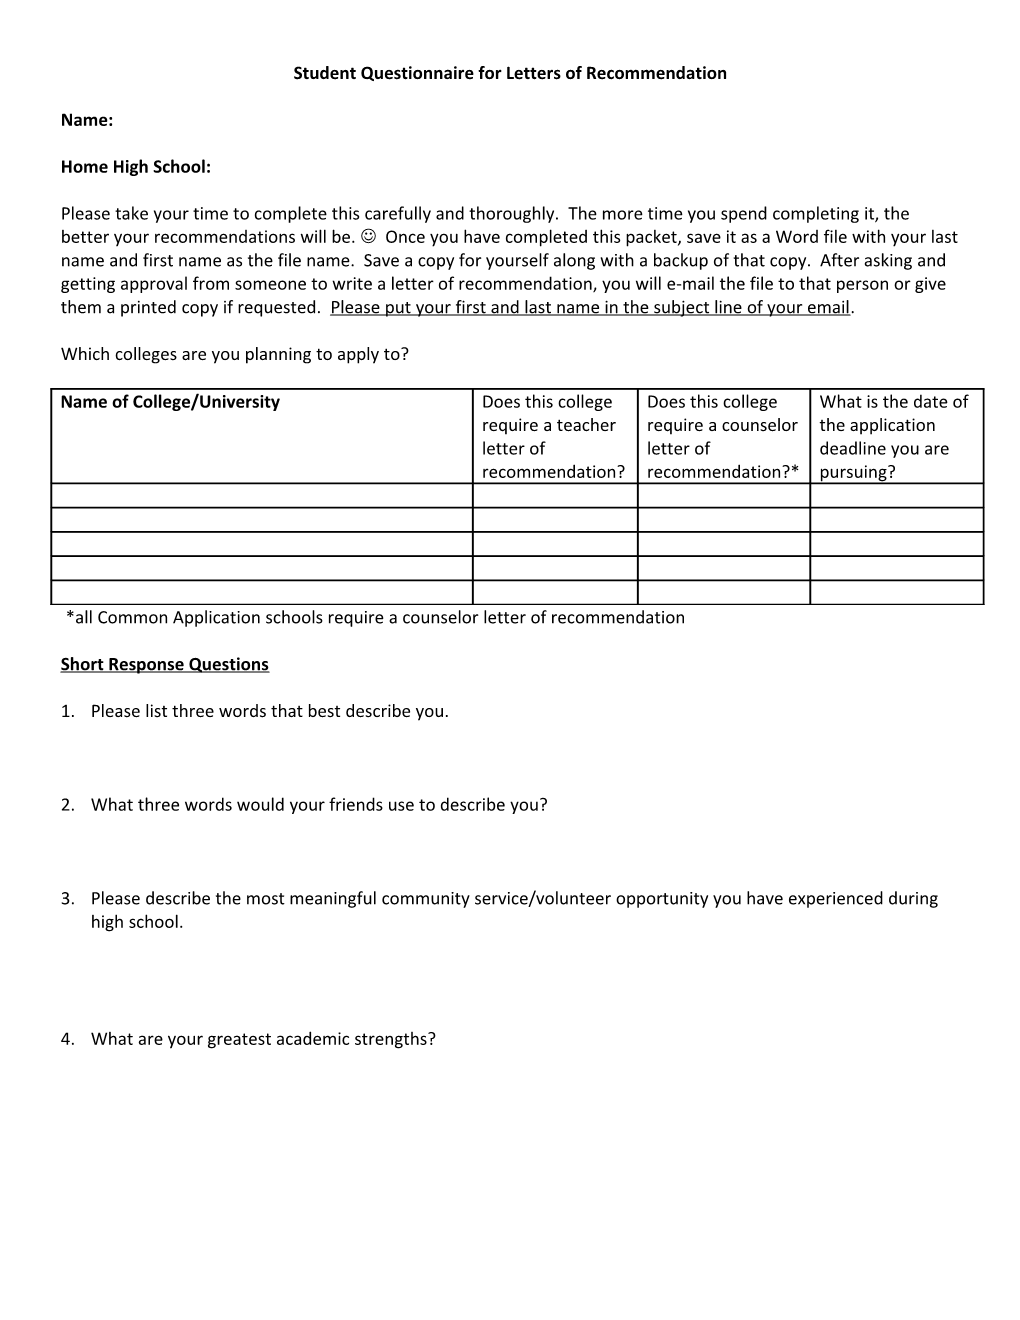 Student Questionnaire for Letters of Recommendation